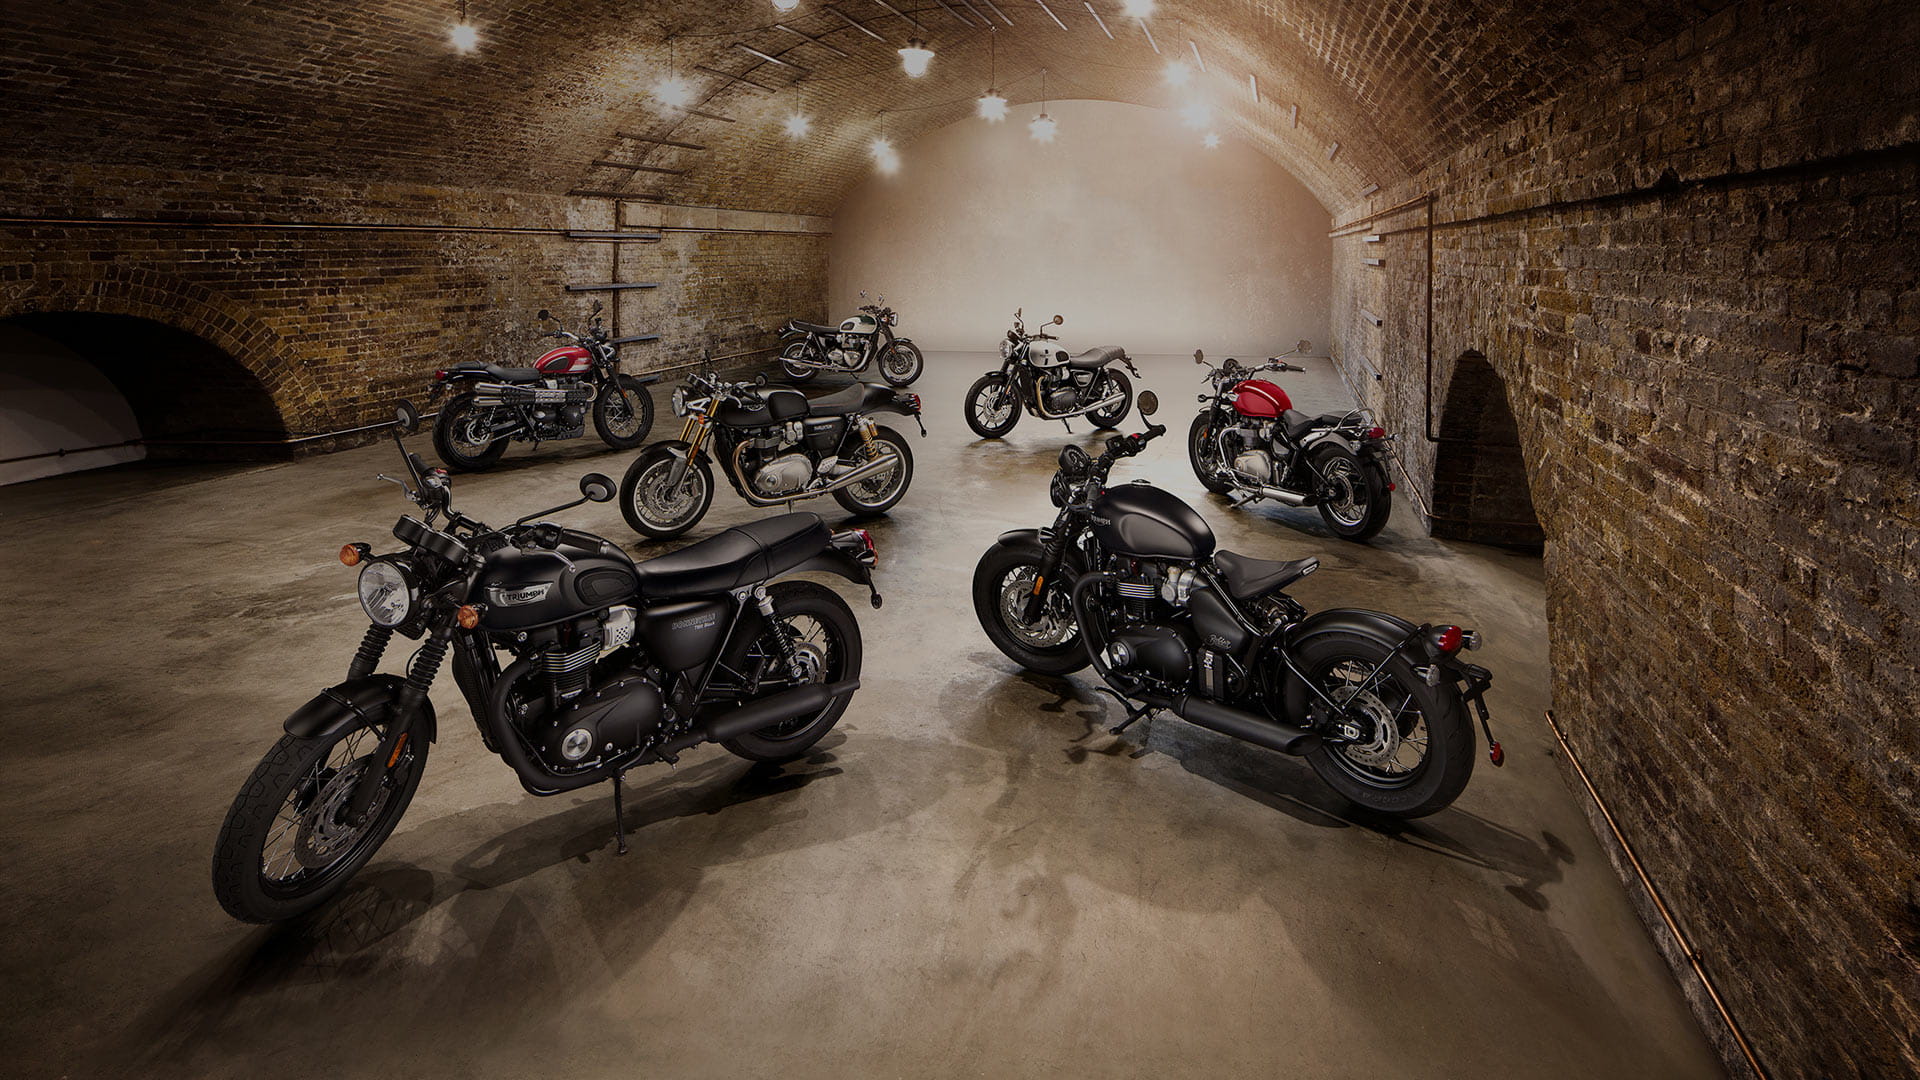 Triumph Motorcycles Classic bikes in warehouse